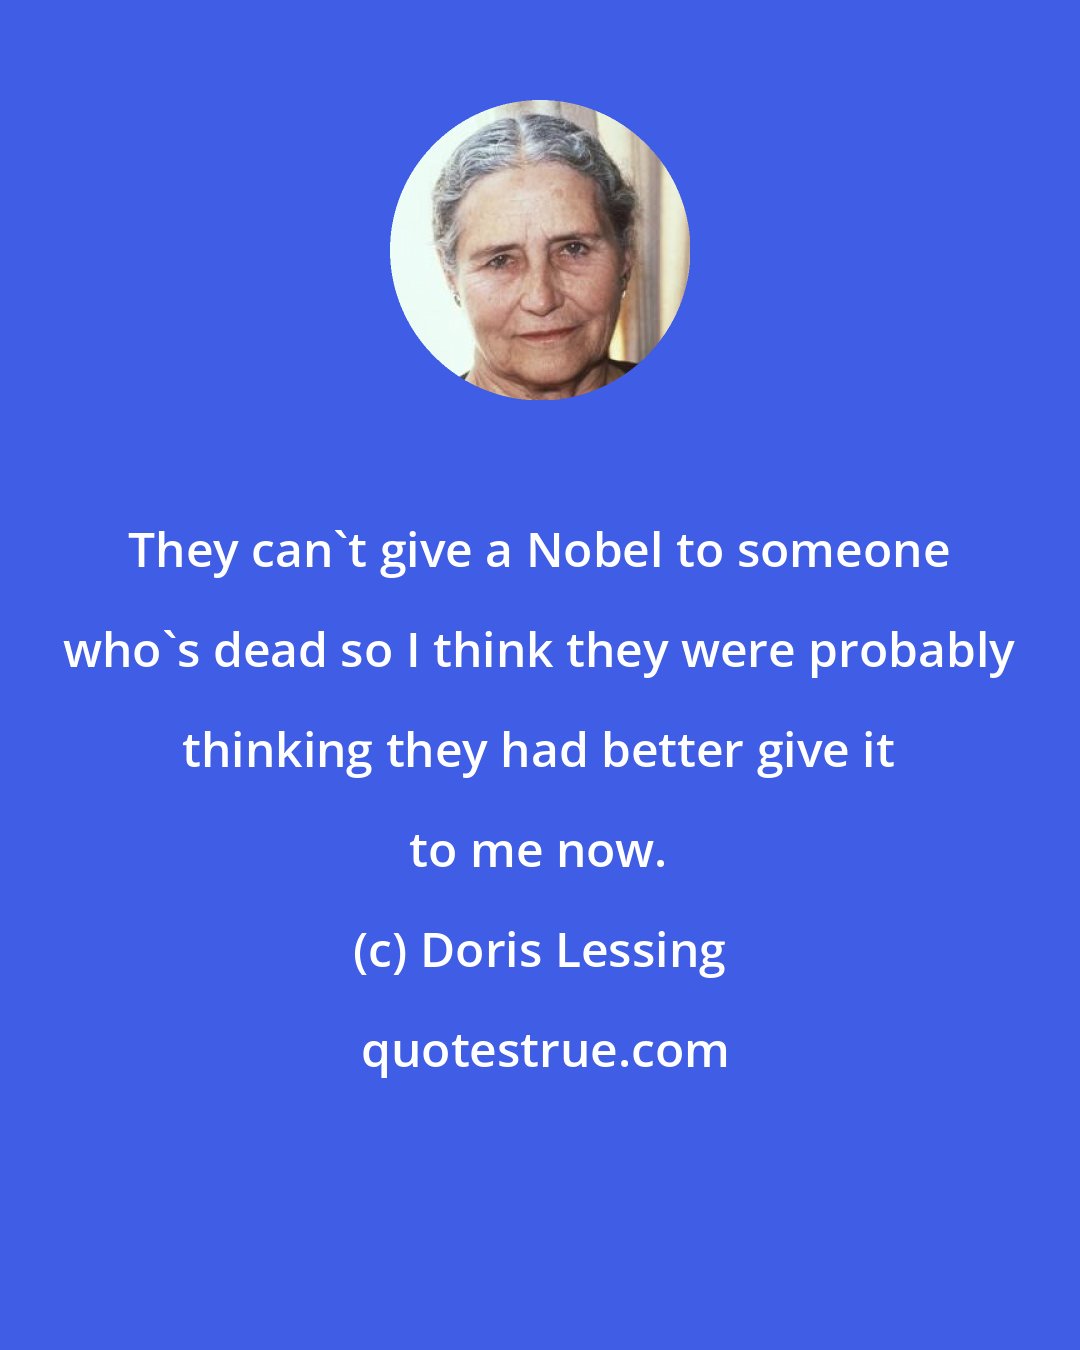 Doris Lessing: They can't give a Nobel to someone who's dead so I think they were probably thinking they had better give it to me now.